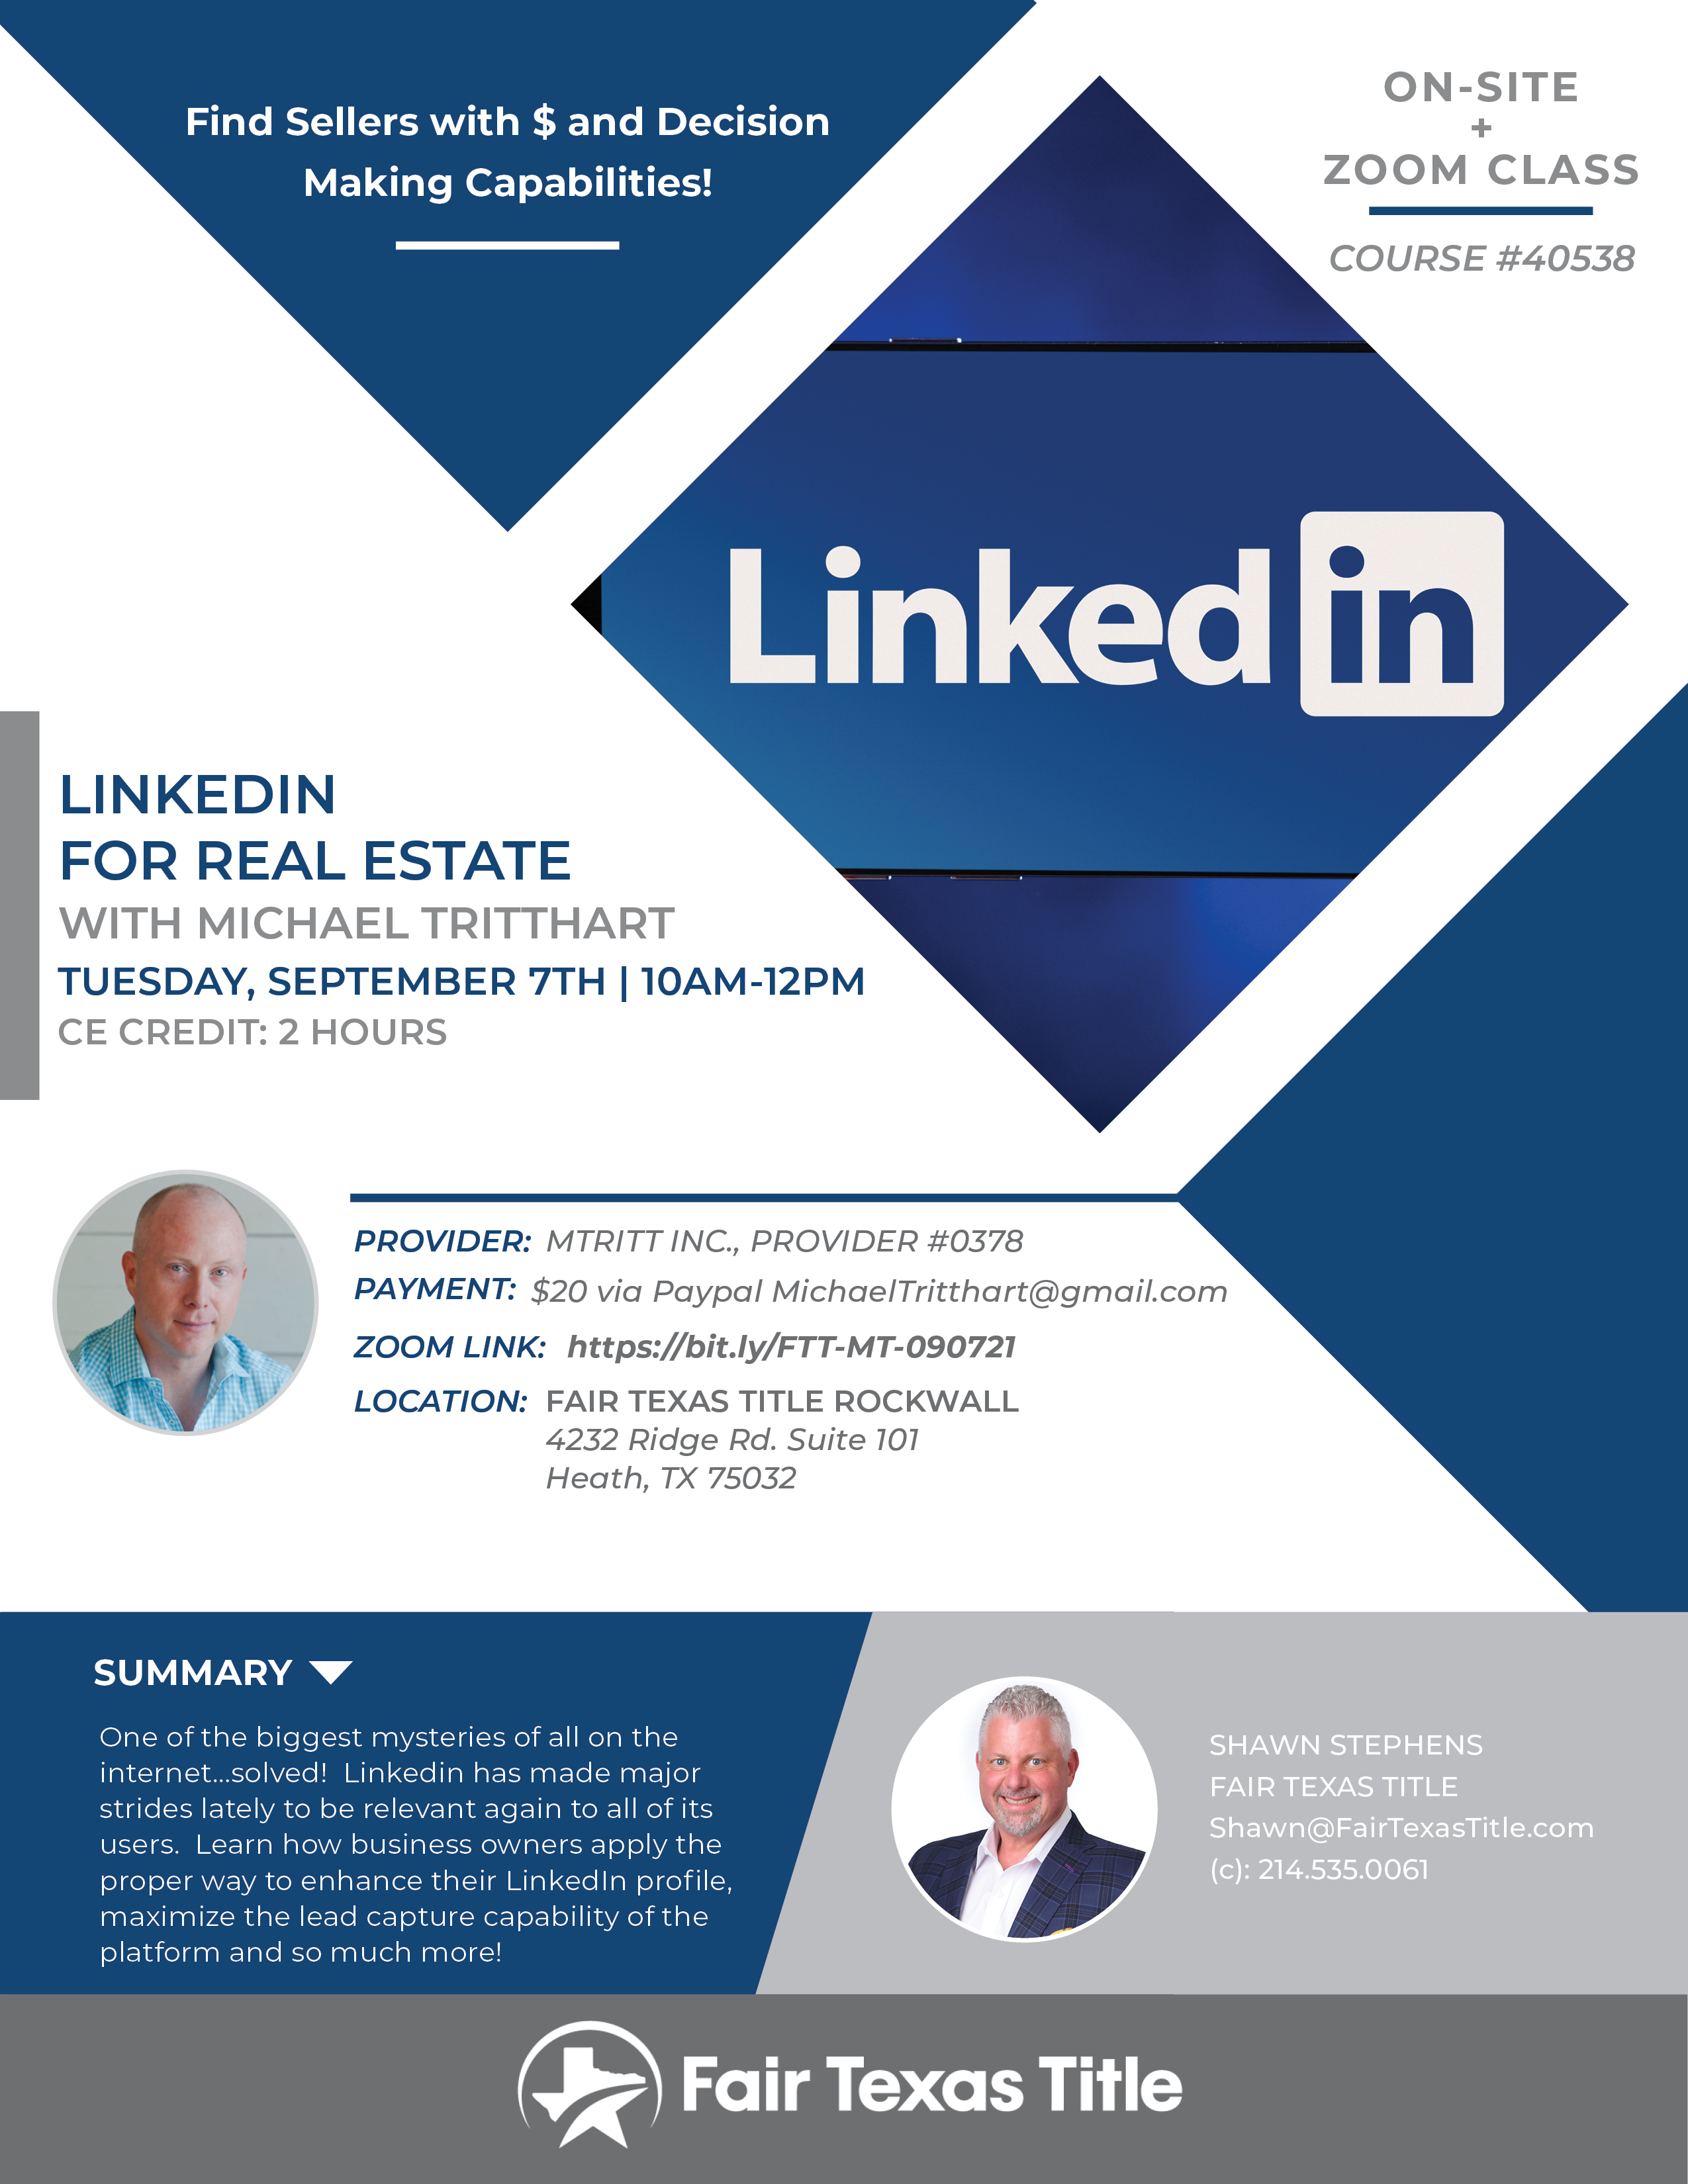 How to Actually Use LinkedIn for Real Estate